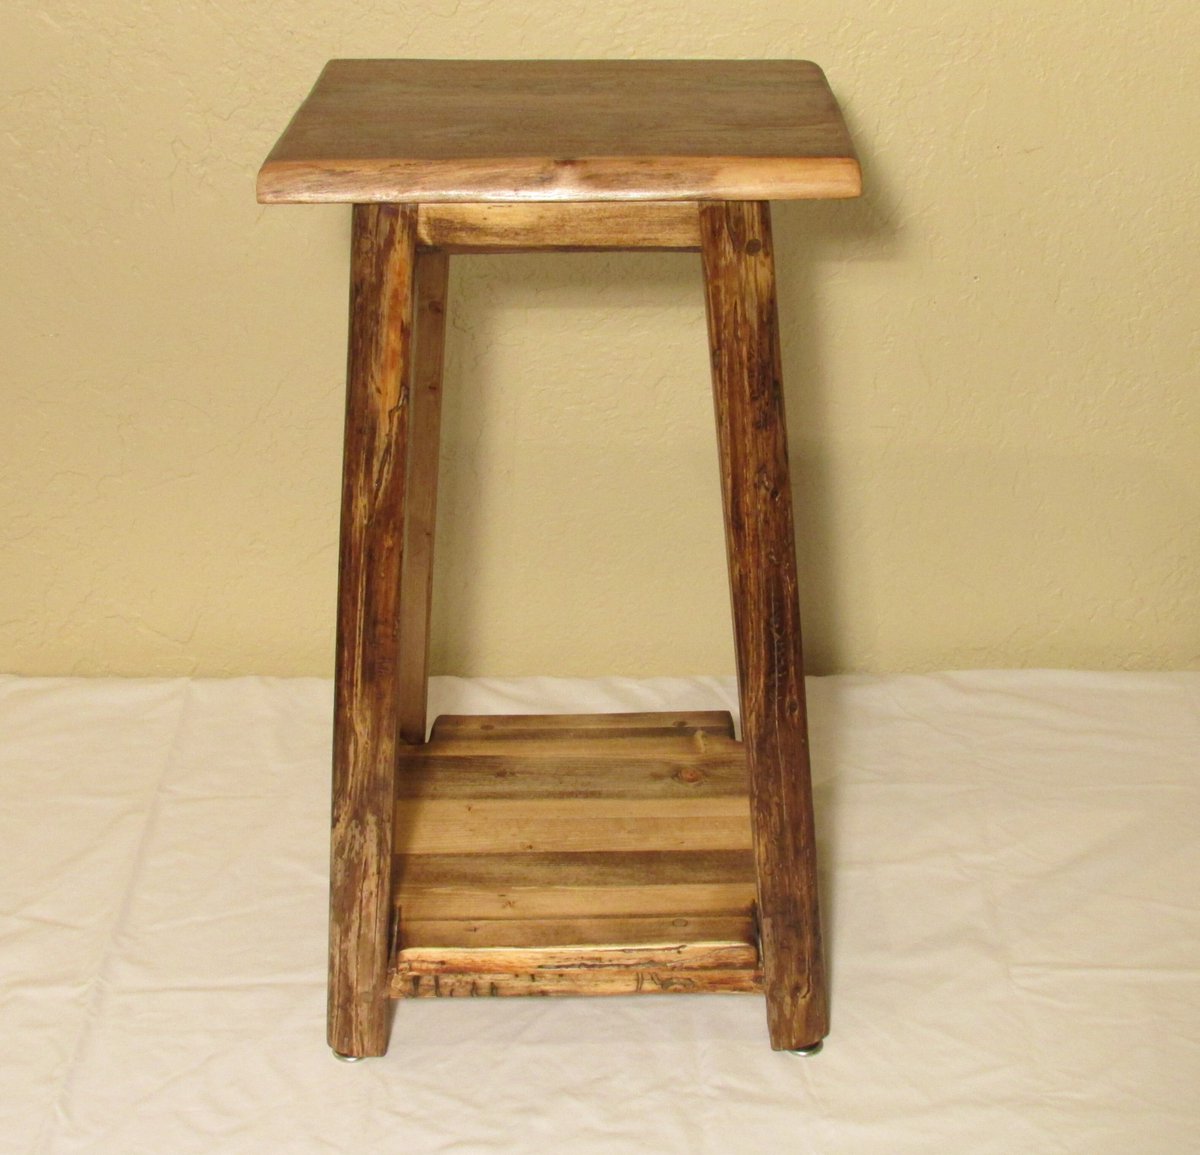 Walnut top with blue stained pine legs. #end table #coffeetable #brecklife #breckdaily #skitown